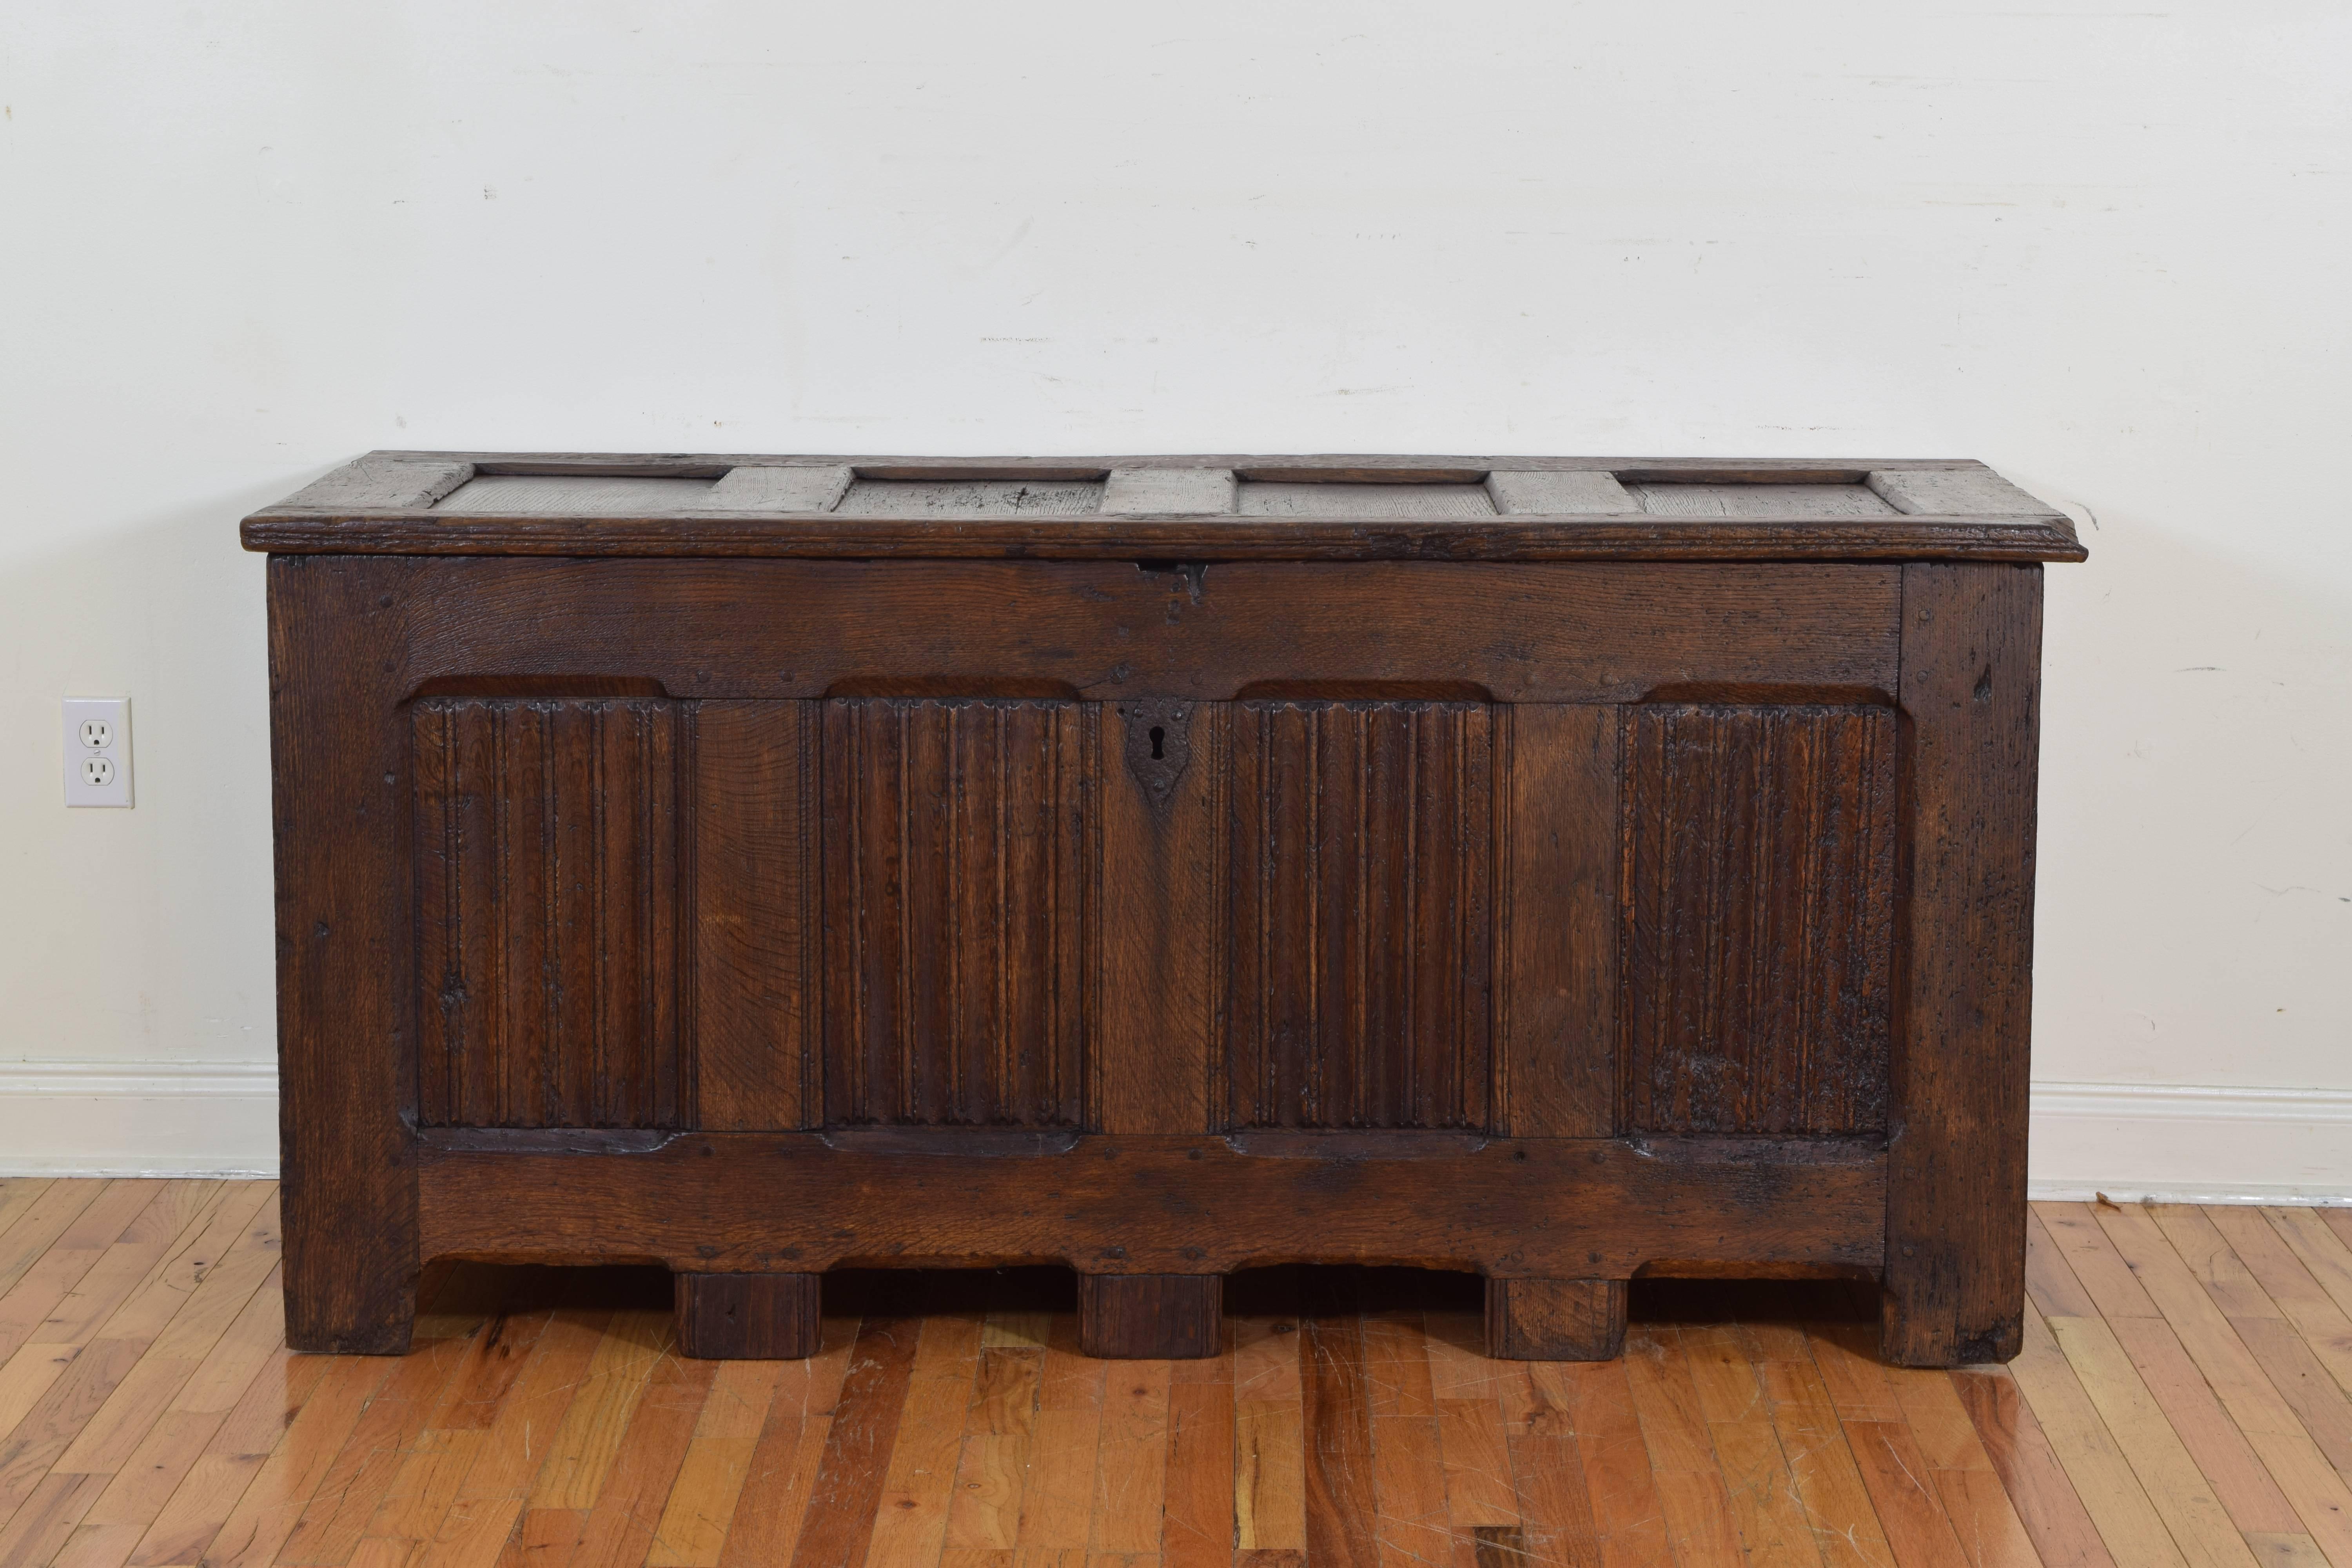 An Elizabethan period walnut linenfold blanket chest/trunk dating from the late 16th century. The thick four-panel top with original iron hinges and lock rasp above a linen fold carved four-panel front with and top, the four feet carved and extended